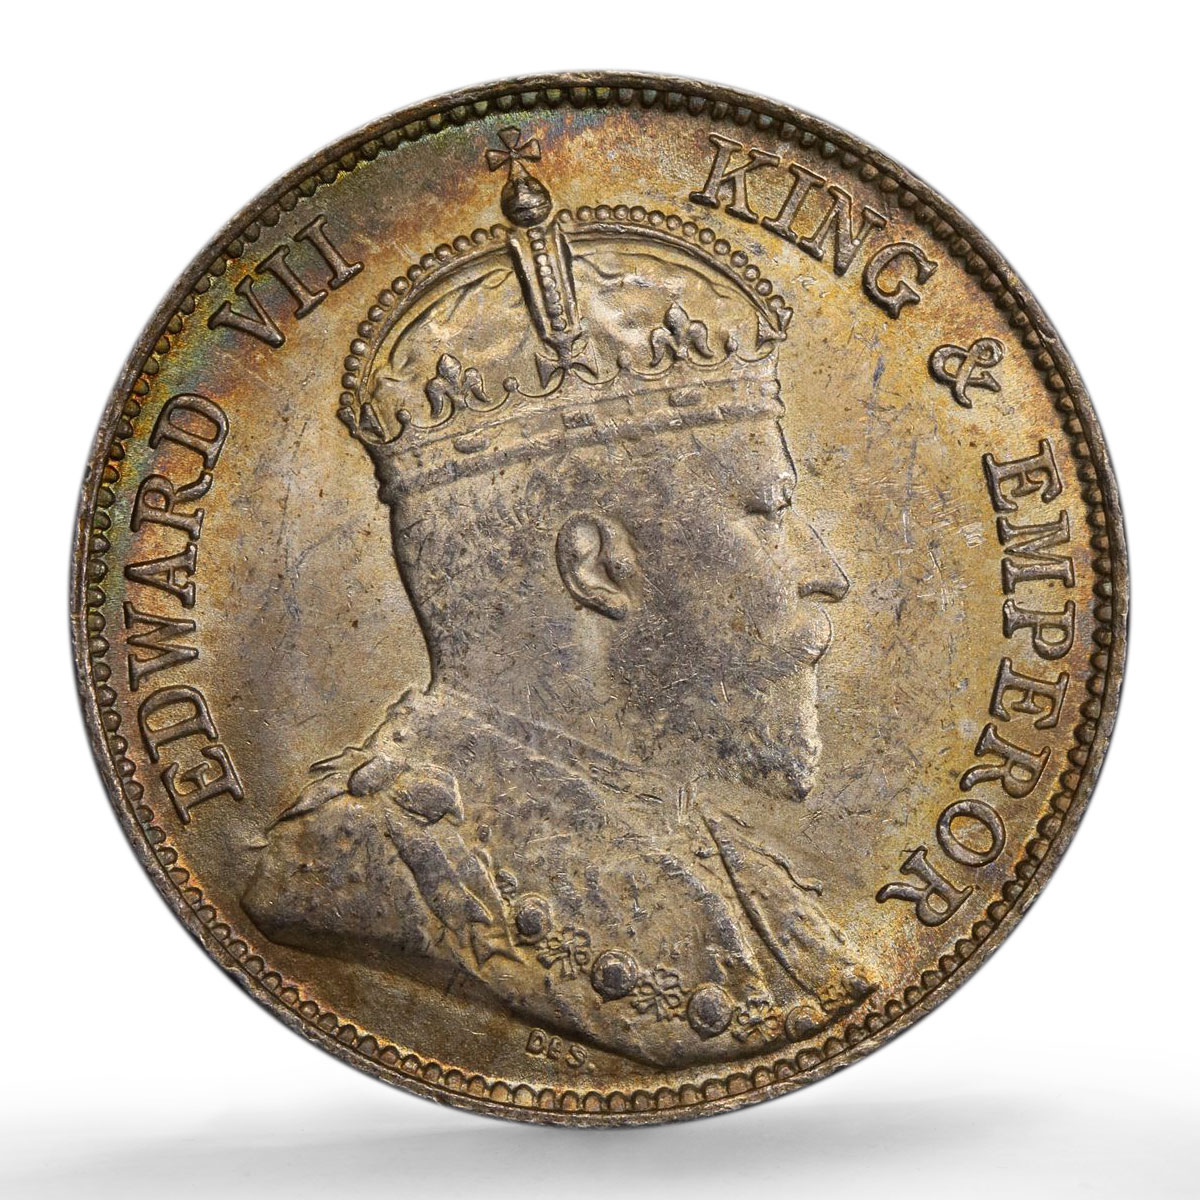 Hong Kong 10 cents State Coinage King Edward VII MS63 PCGS silver coin 1902